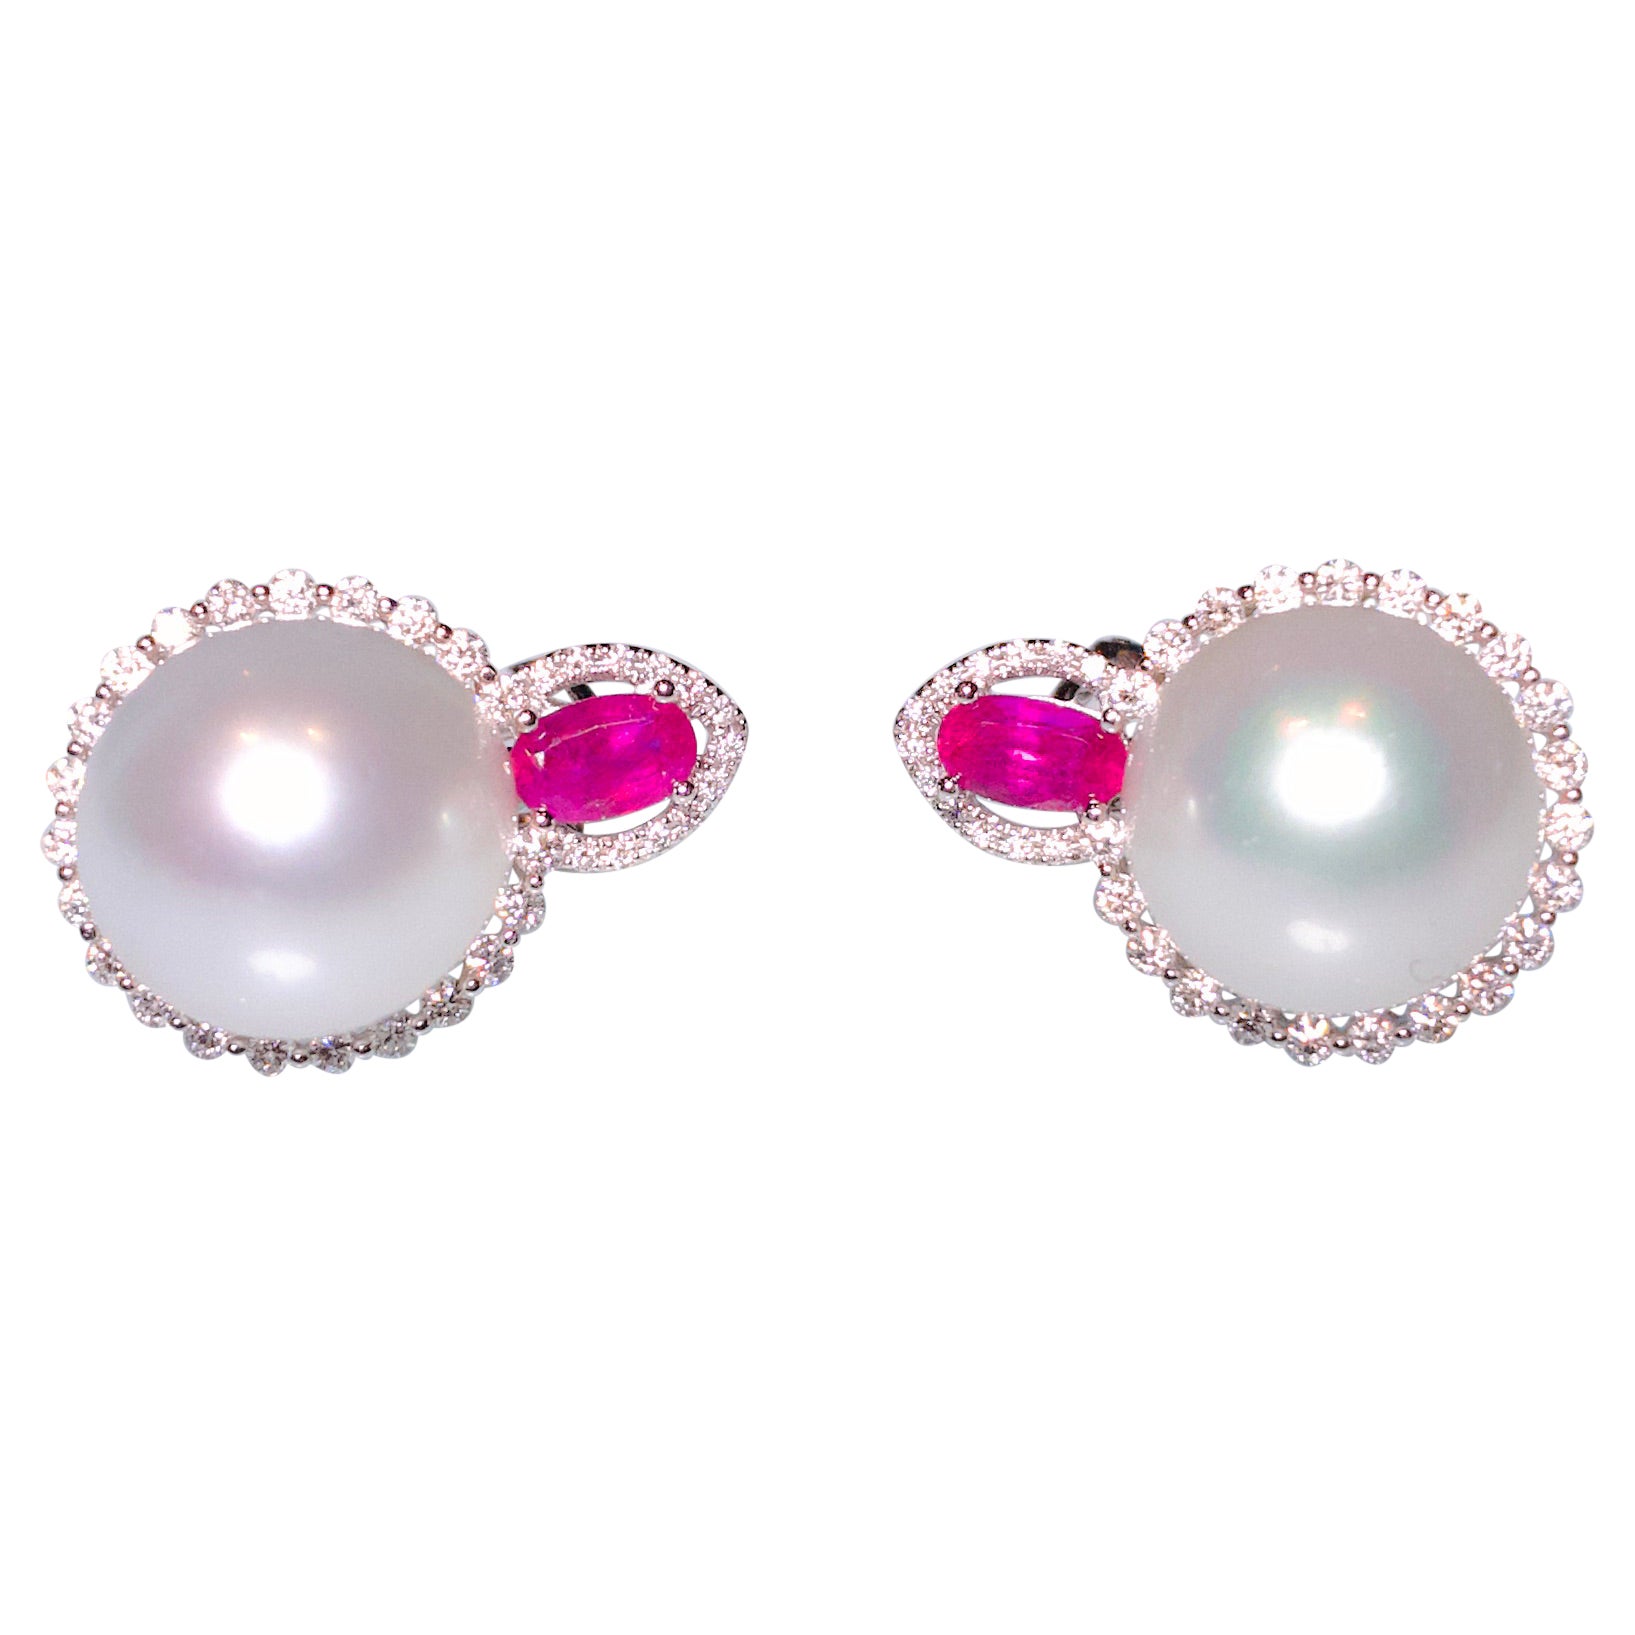 White South Sea Pearl, Ruby and Diamond Earring in 18k White Gold